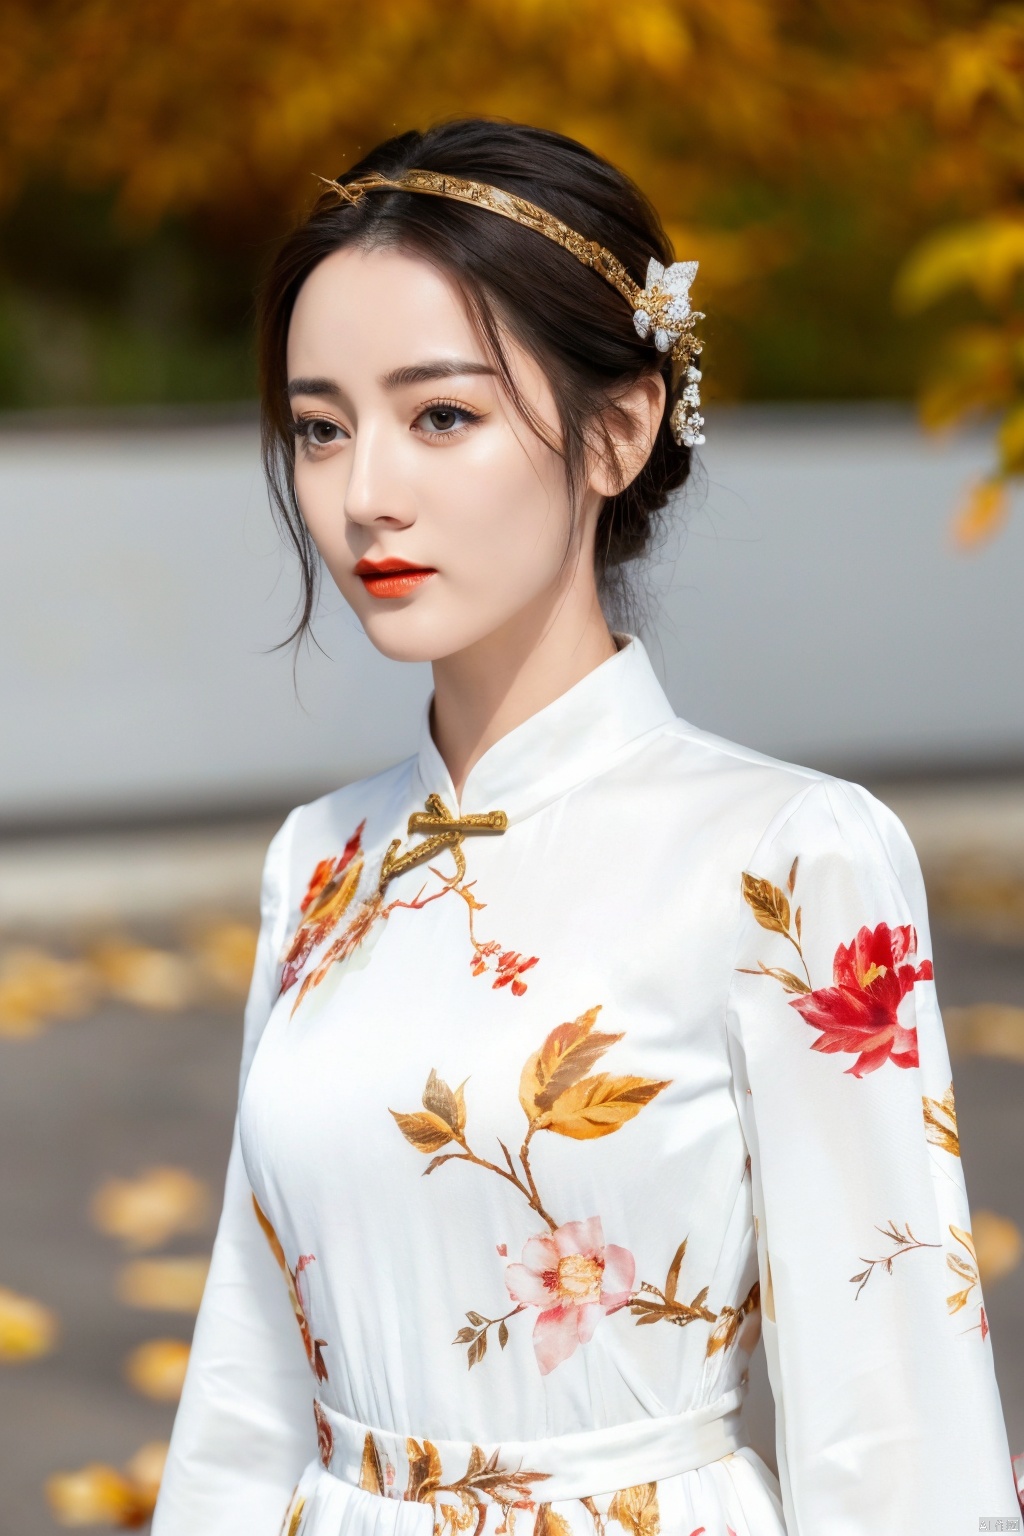 1 girl, wearing a white dress with floral patterns printed on it, featuring gold and white themes for a sense of coordination, order, half body, close-up, upper body, outdoor, front, best image, fallen leaves, branches, autumn leaves, Chinese clothing, ancient style, Chinese long skirt, long sleeves, double layered light gauze skirt, brown eyes, black hair, ultra-high definition, super-resolution, high-resolution,